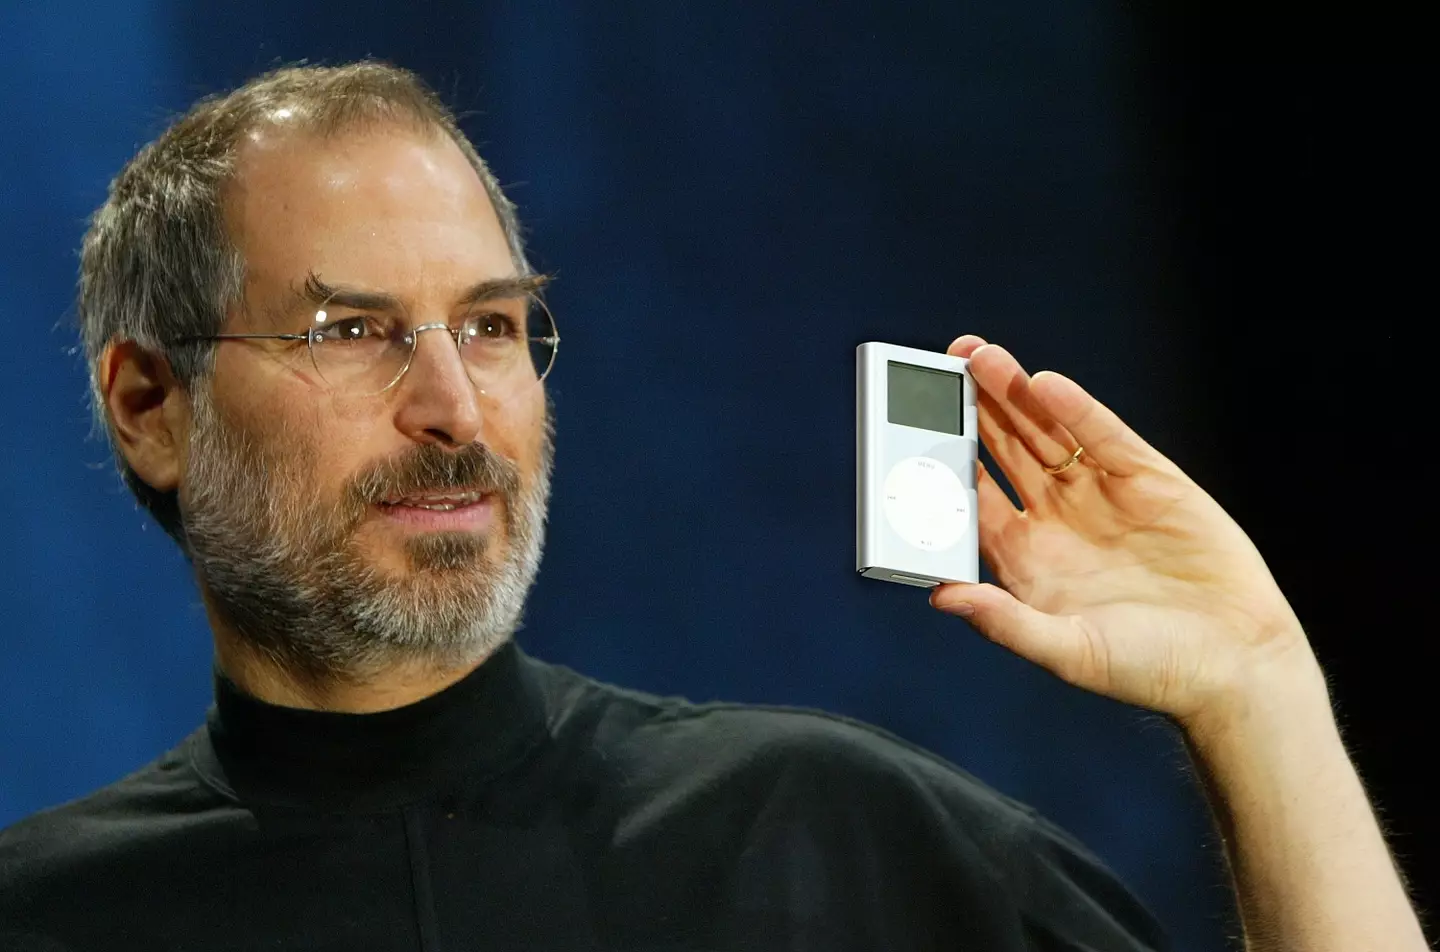 Steve Jobs passed away from cancer in 2011.